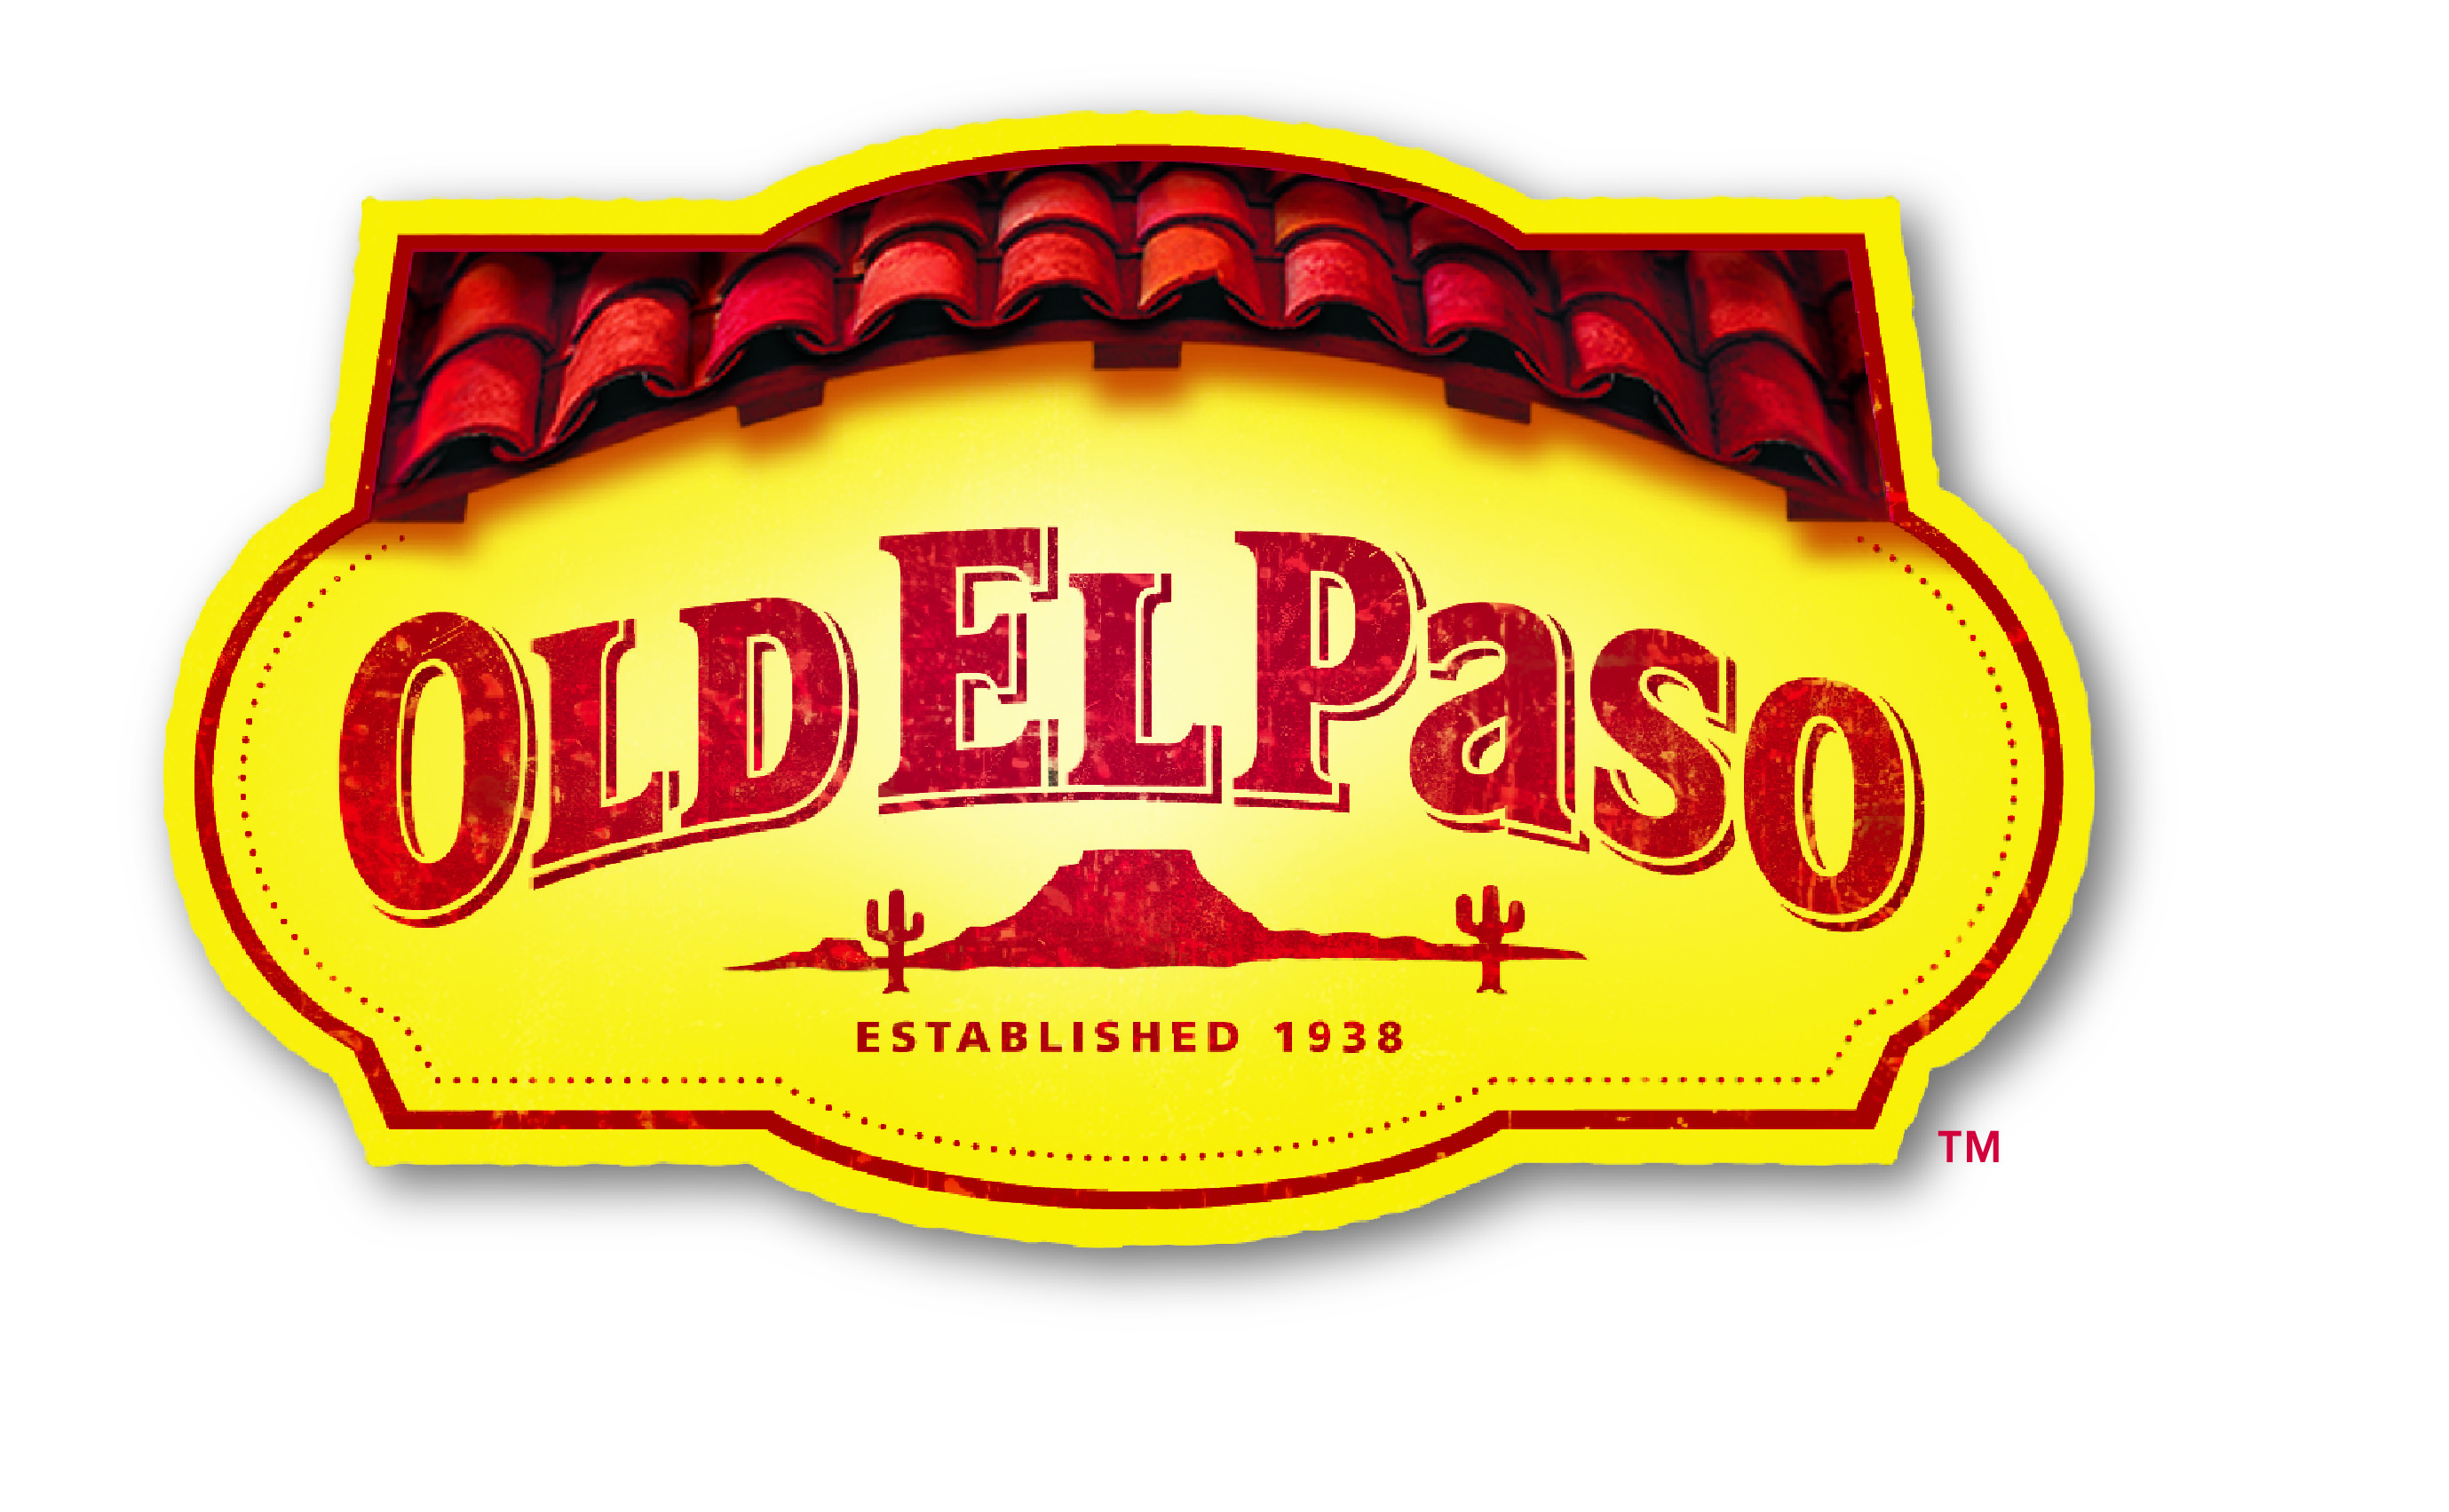 Old El Paso logo with yellow background and red lettering